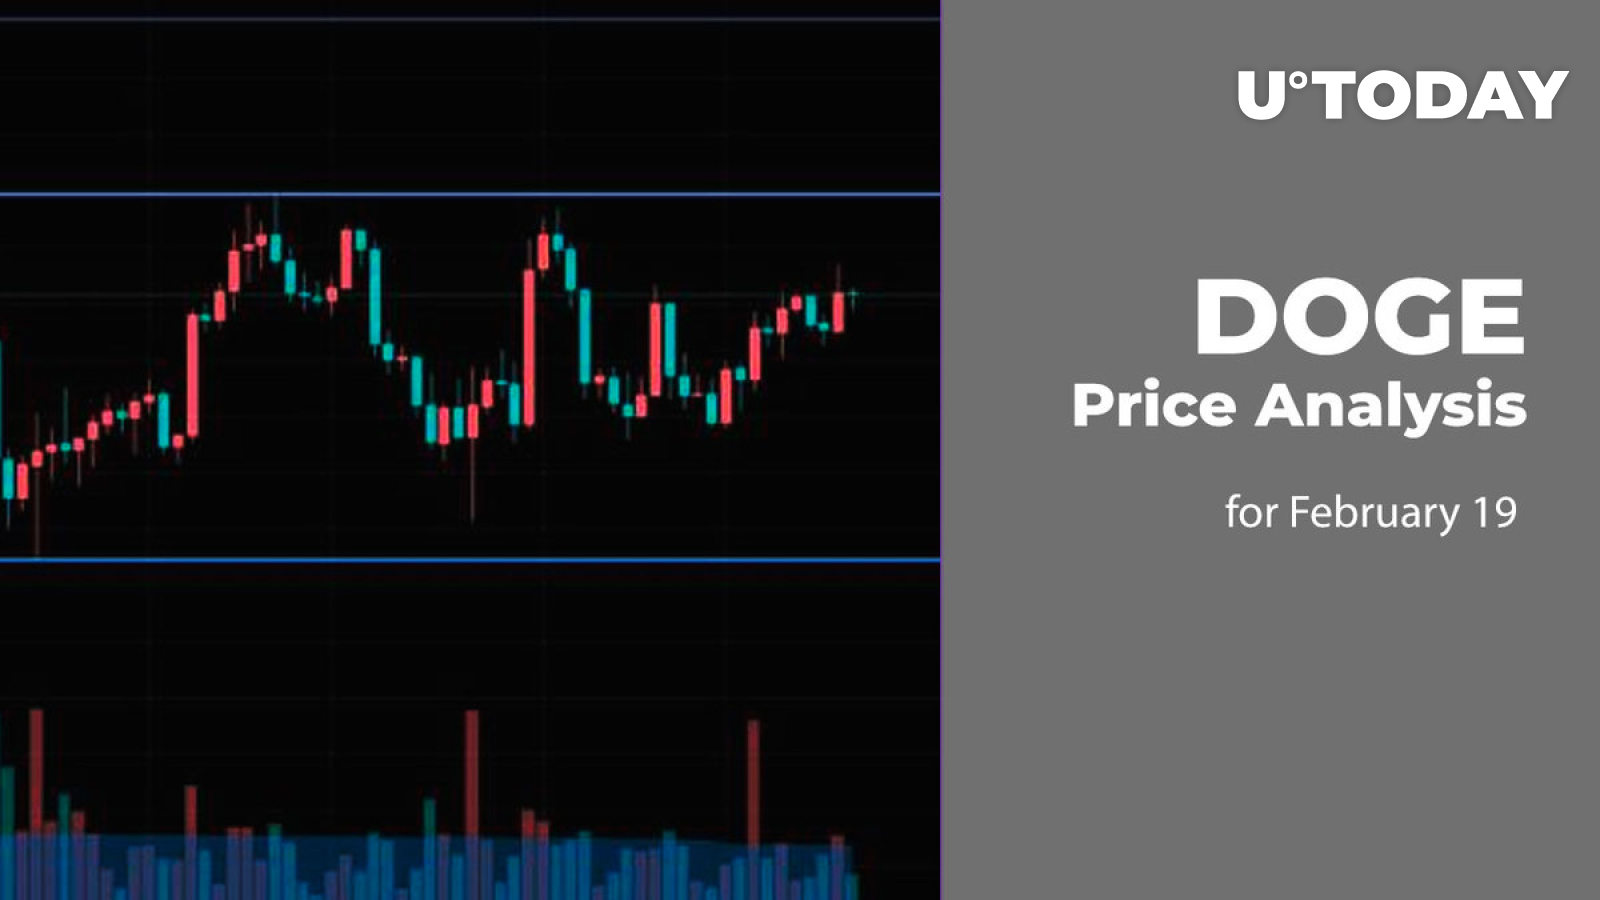 DOGE Price Analysis for February 19